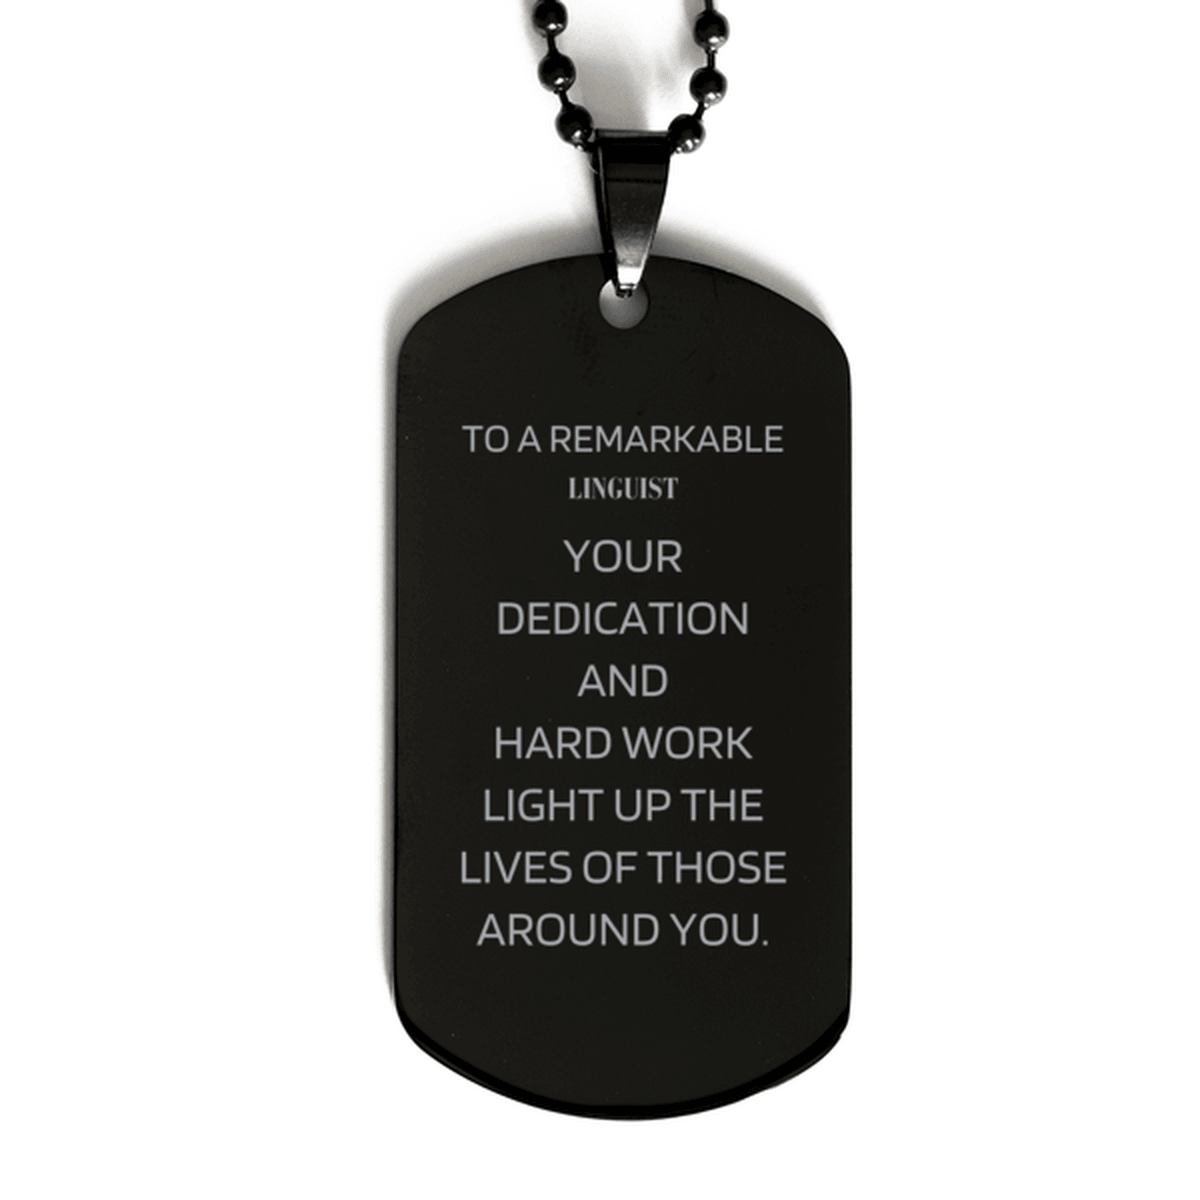 Remarkable Linguist Gifts, Your dedication and hard work, Inspirational Birthday Christmas Unique Black Dog Tag For Linguist, Coworkers, Men, Women, Friends - Mallard Moon Gift Shop